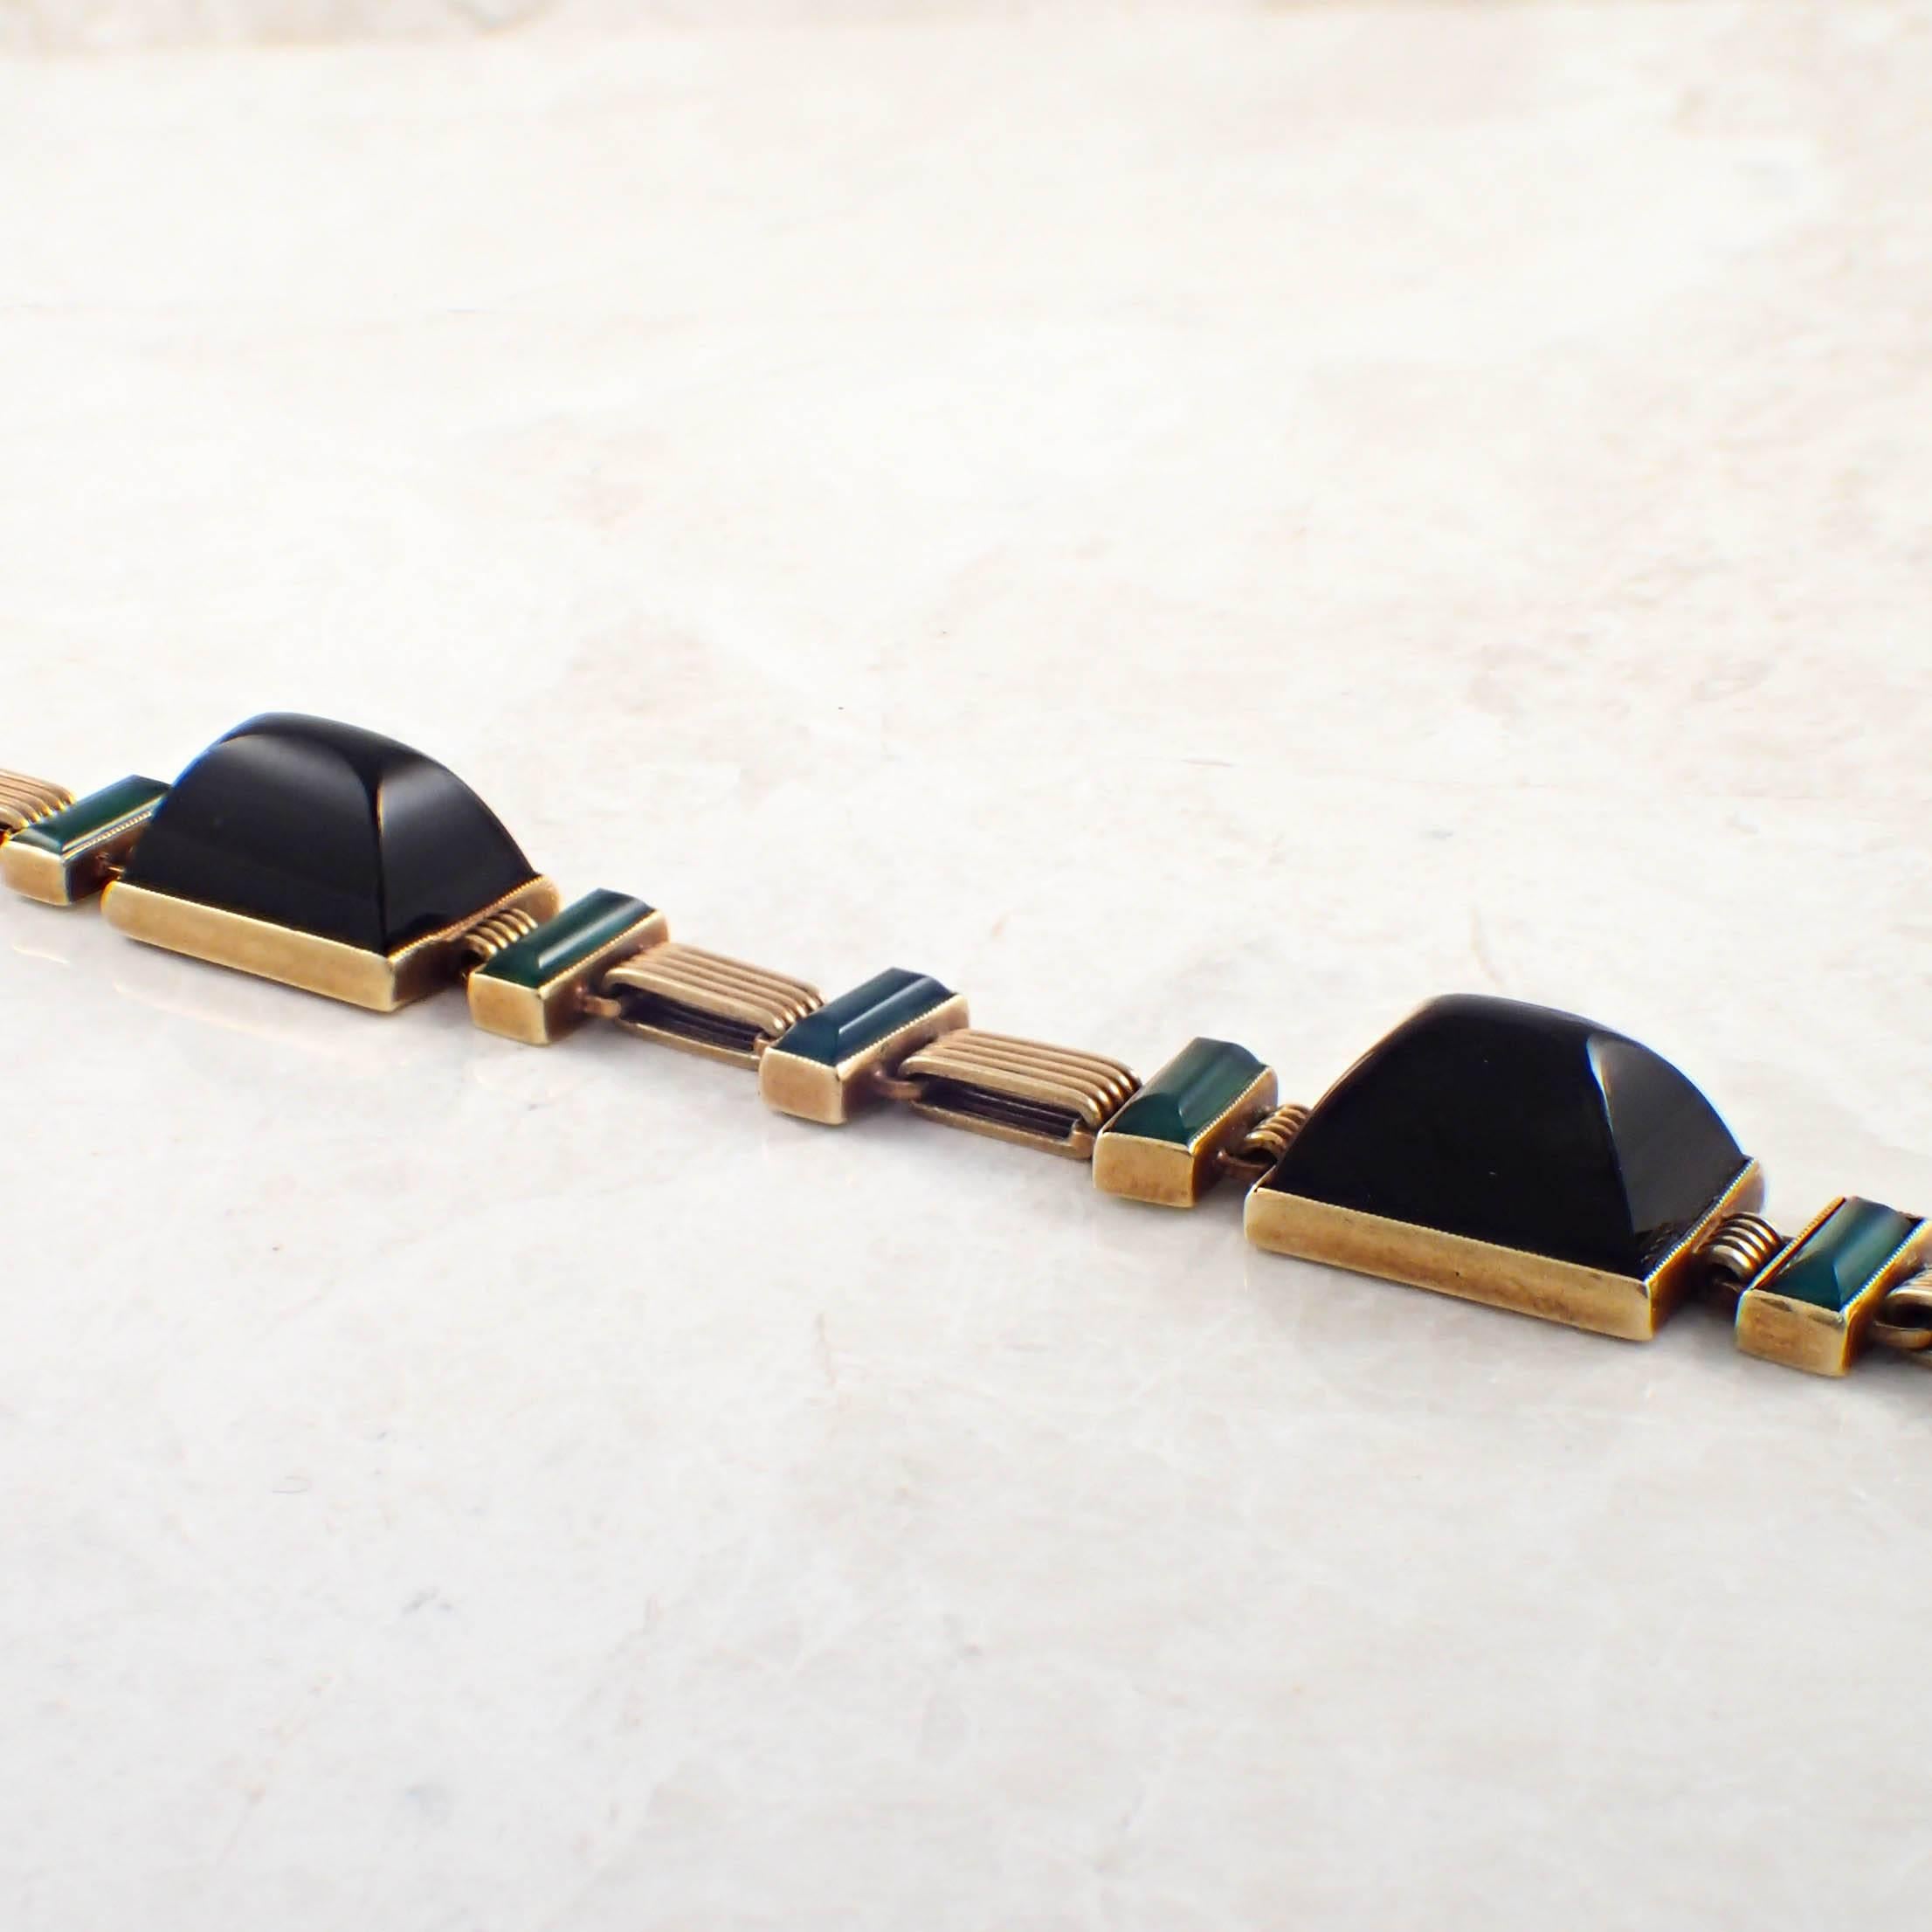 14K Yellow gold Art Deco onyx bracelet. The bracelet alternates sugarloaf cabochon black onyx and emerald cut green onyx sections. The bracelet measures 12.7 mm and 7 inches long. Gold weight 15 DWTs. Circa 1920s.